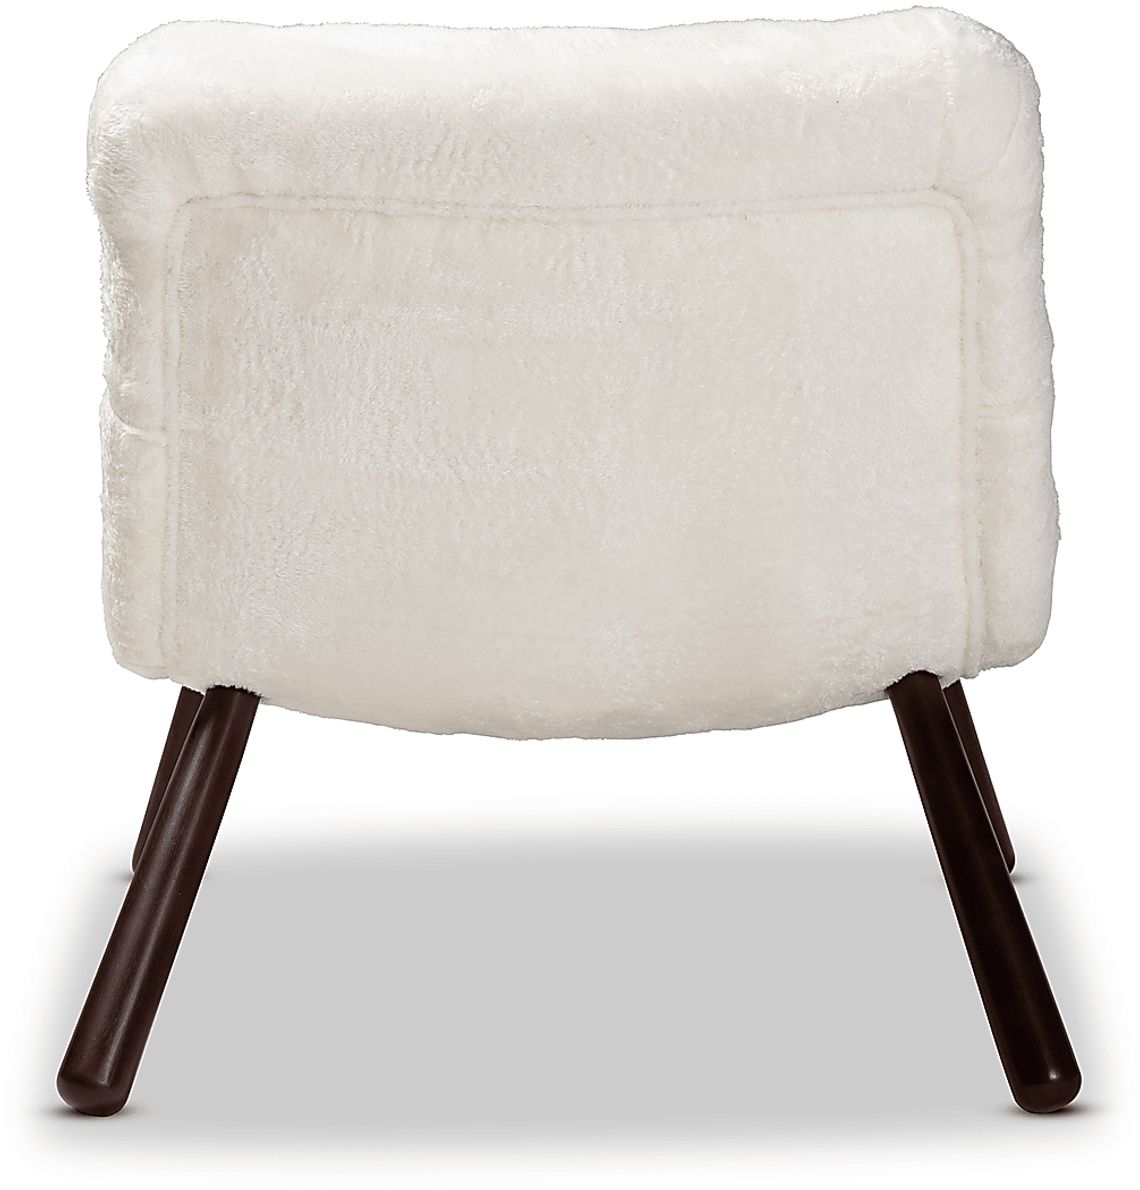 Alyso Accent Chair